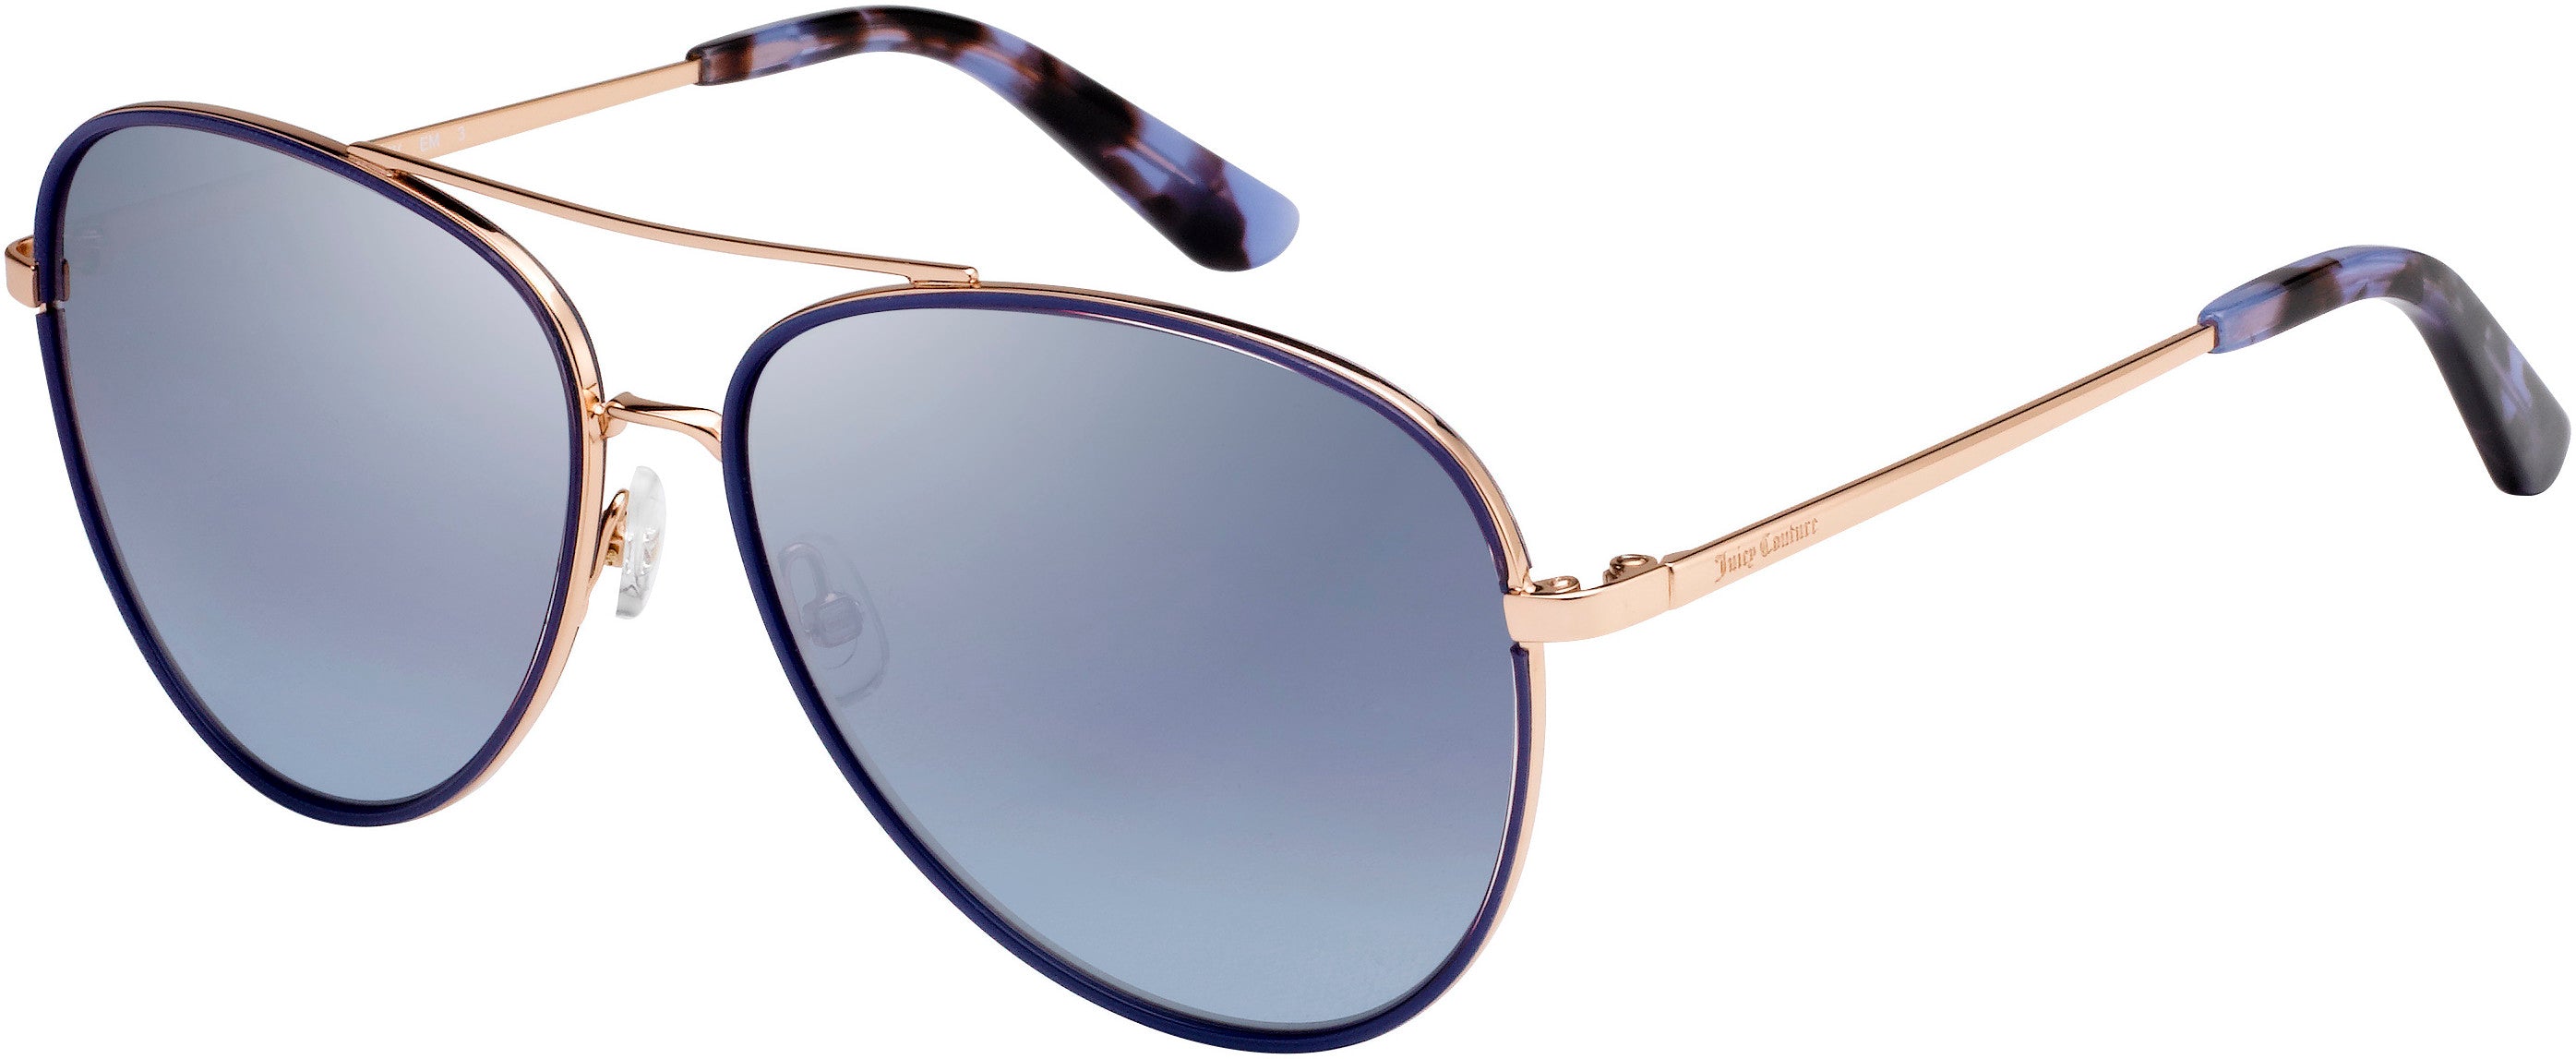 Juicy Couture Juicy 599/S Aviator Sunglasses 0LKS-0LKS  Gold Blue (GO Silver Mirror Shaded Azu)